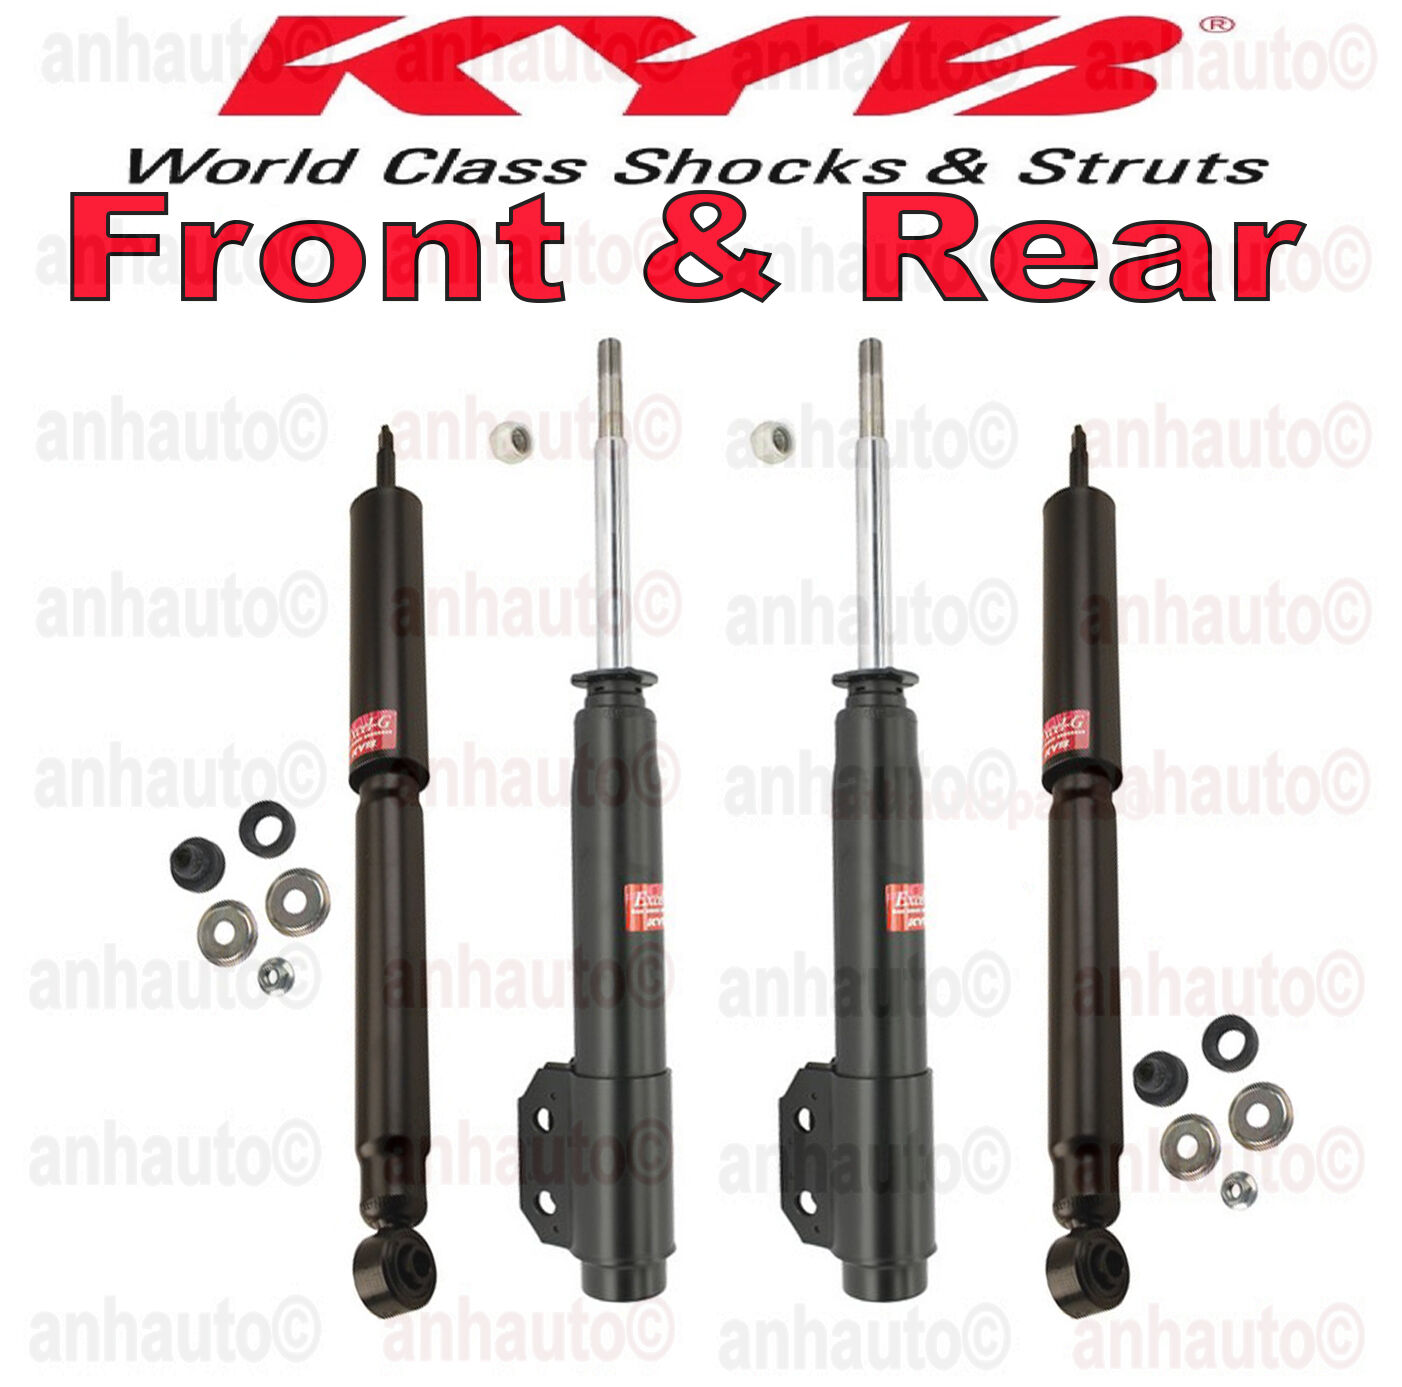 4-KYB Excel-G Struts/Shocks  (2-Front & 2-Rear) Ford Mustang 1994 to 2004